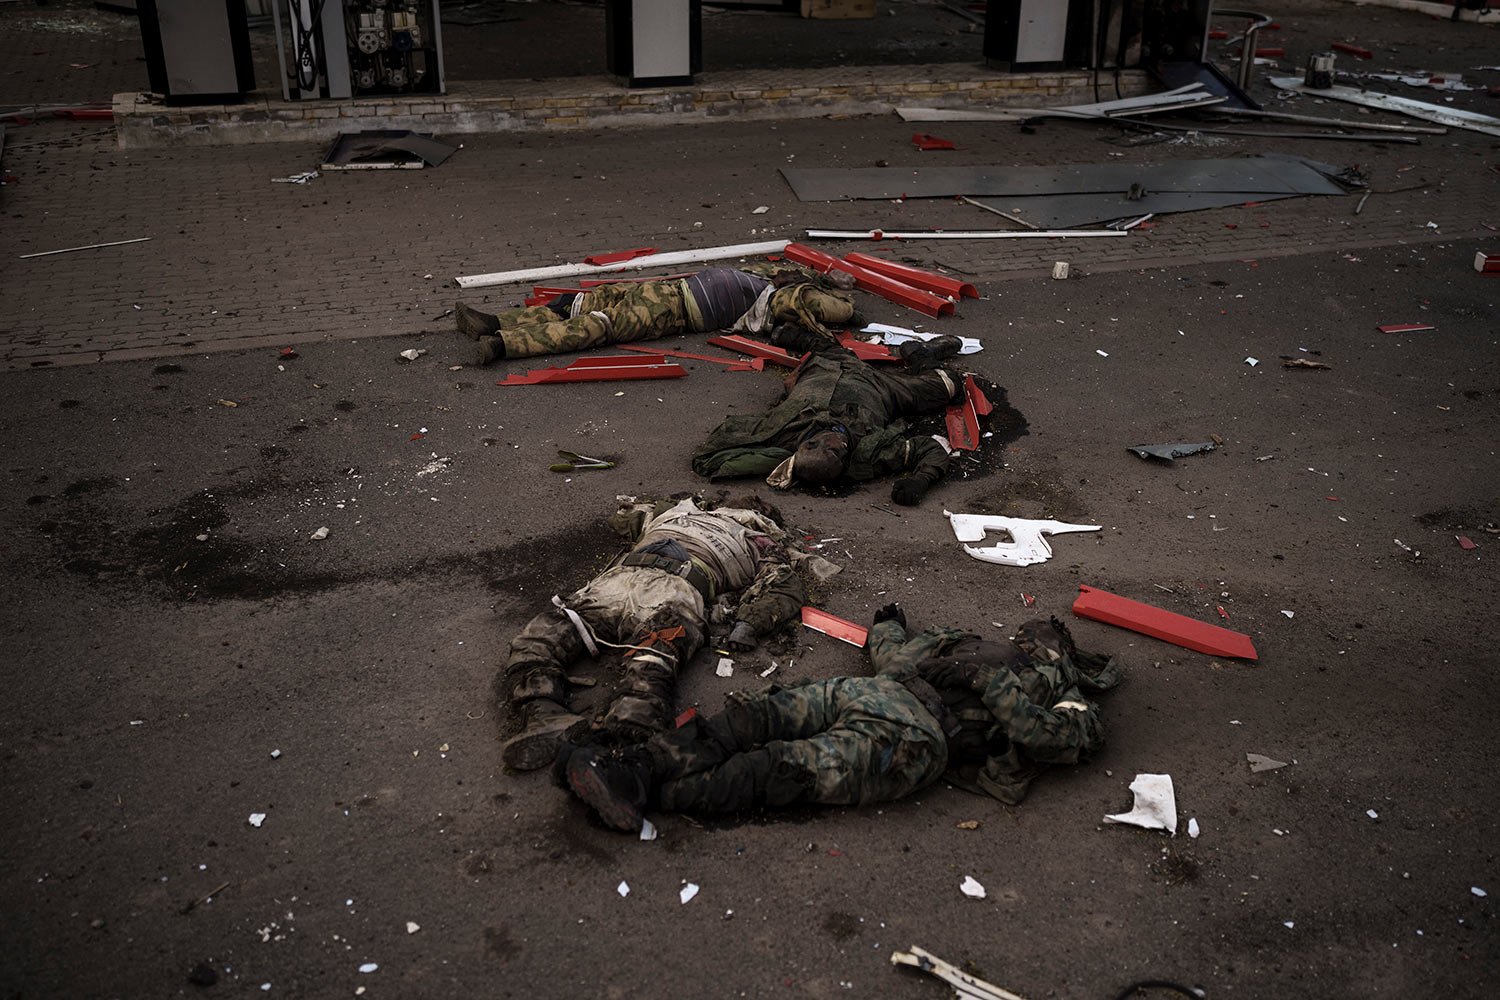  The body of unidentified men, believed to be Russian soldiers, lay forming a “Z” shape near a village recently retaken by Ukrainian forces in the outskirts of Kharkiv, Ukraine, Monday, May 2, 2022. (AP Photo/Felipe Dana)  